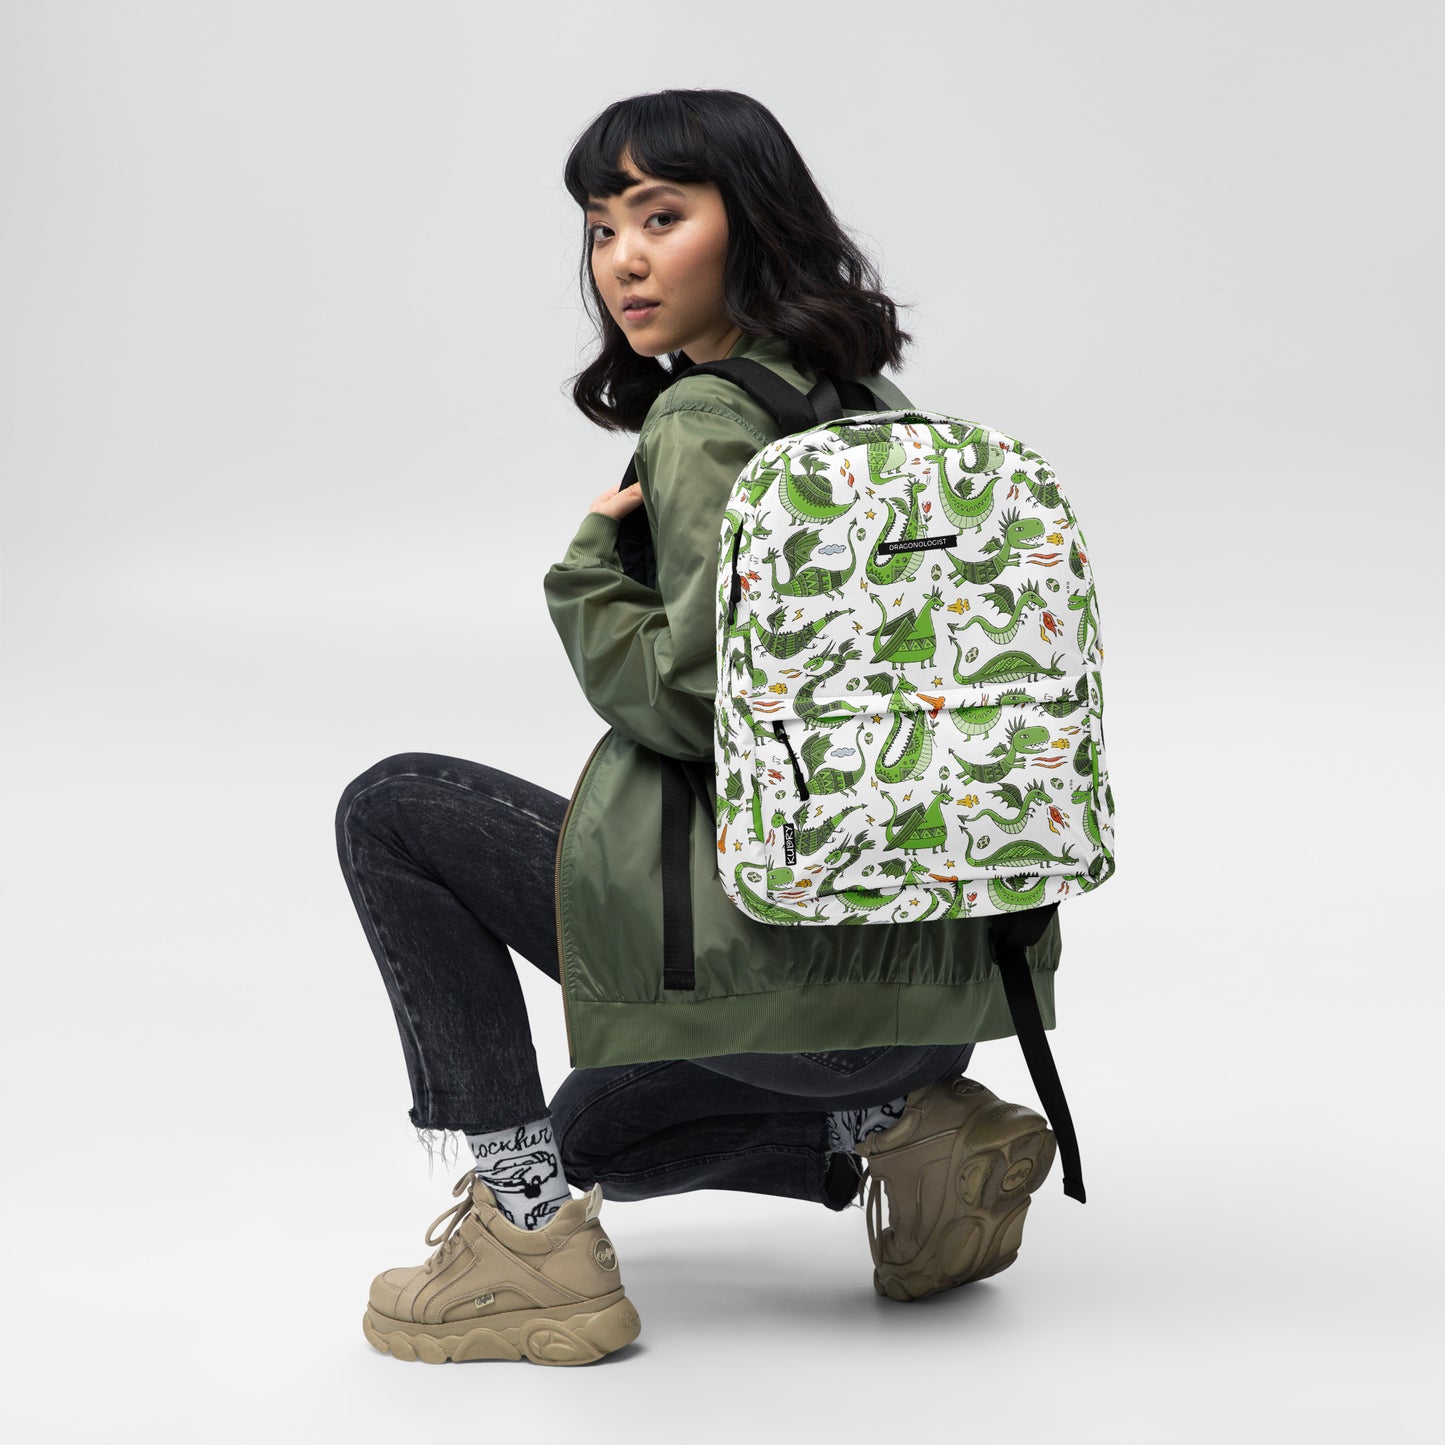 Asian Woman with Personalised Backpack with funny green Dragons. Basic text you can change - Dragonologist